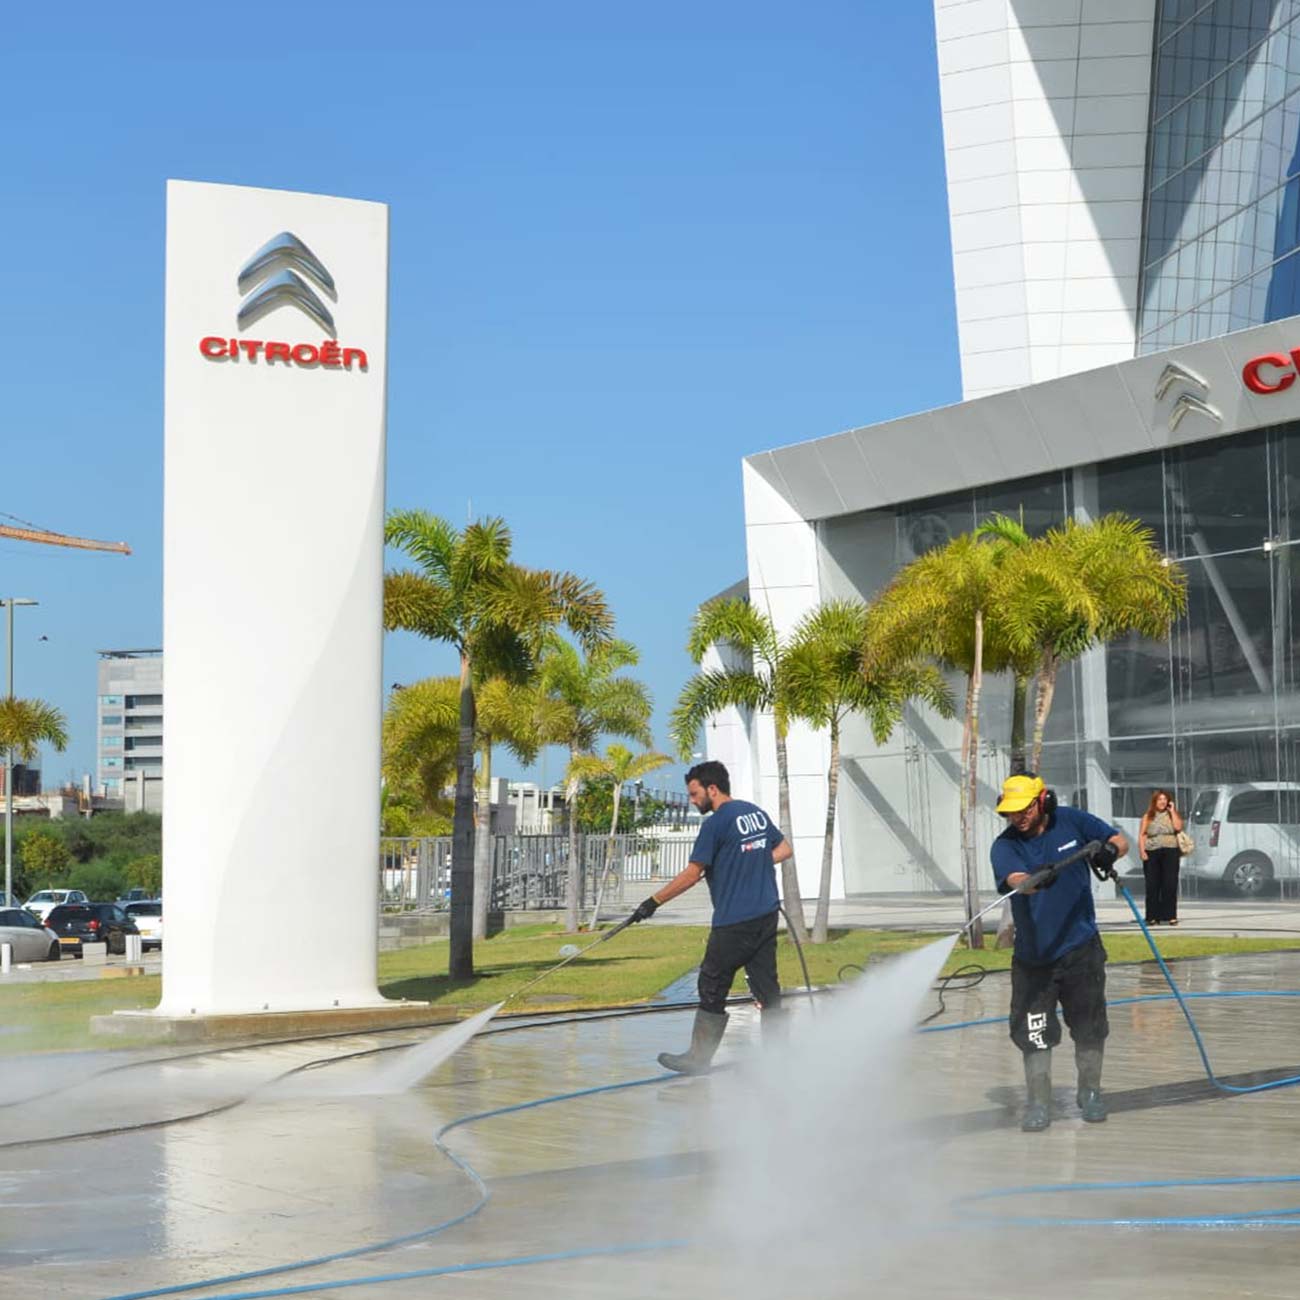 Citroen car dealership employees spray the pavement with high-pressure washing machines